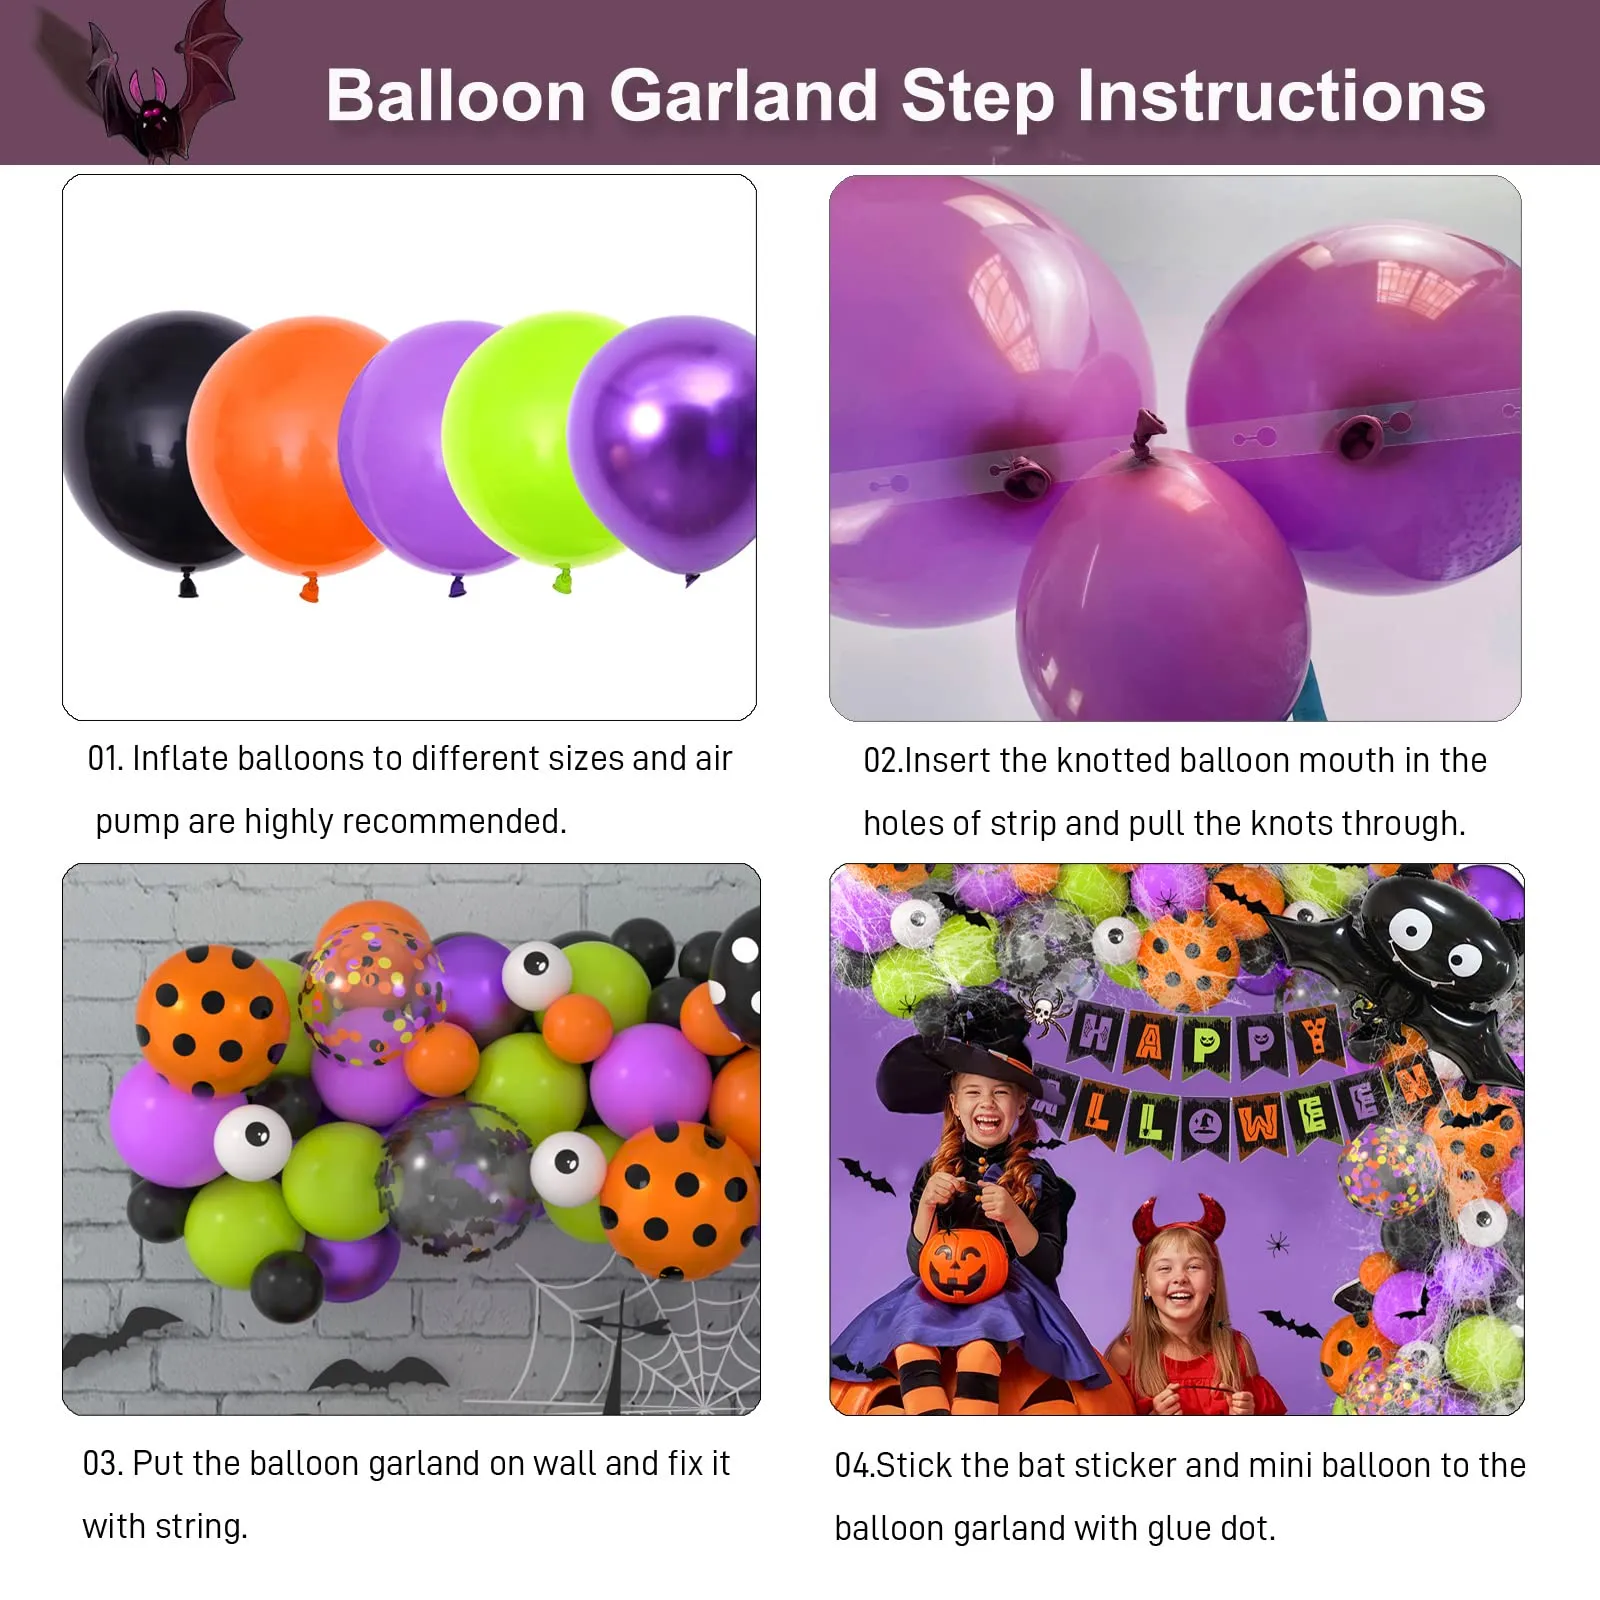 happy halloween balloon arch garland with halloween banner spider web decoration bat foil balloon confetti balloons bat stickers for halloween party supplies scary birthday decorations